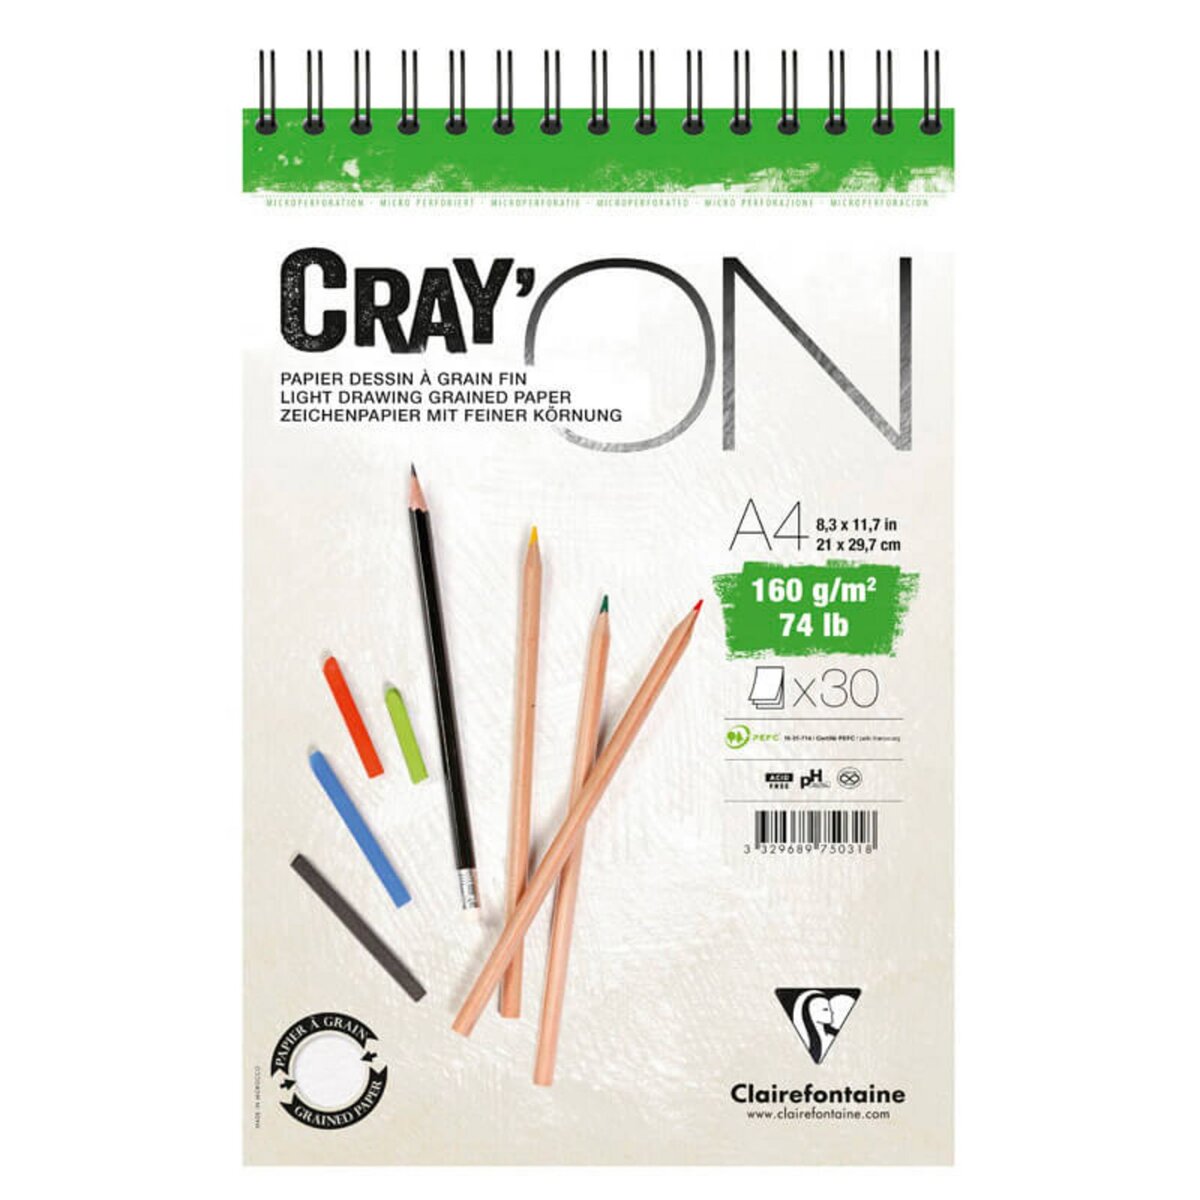 CLAIREFONTAINE Cray'on bloc 30 feuilles A4 160 g blanc